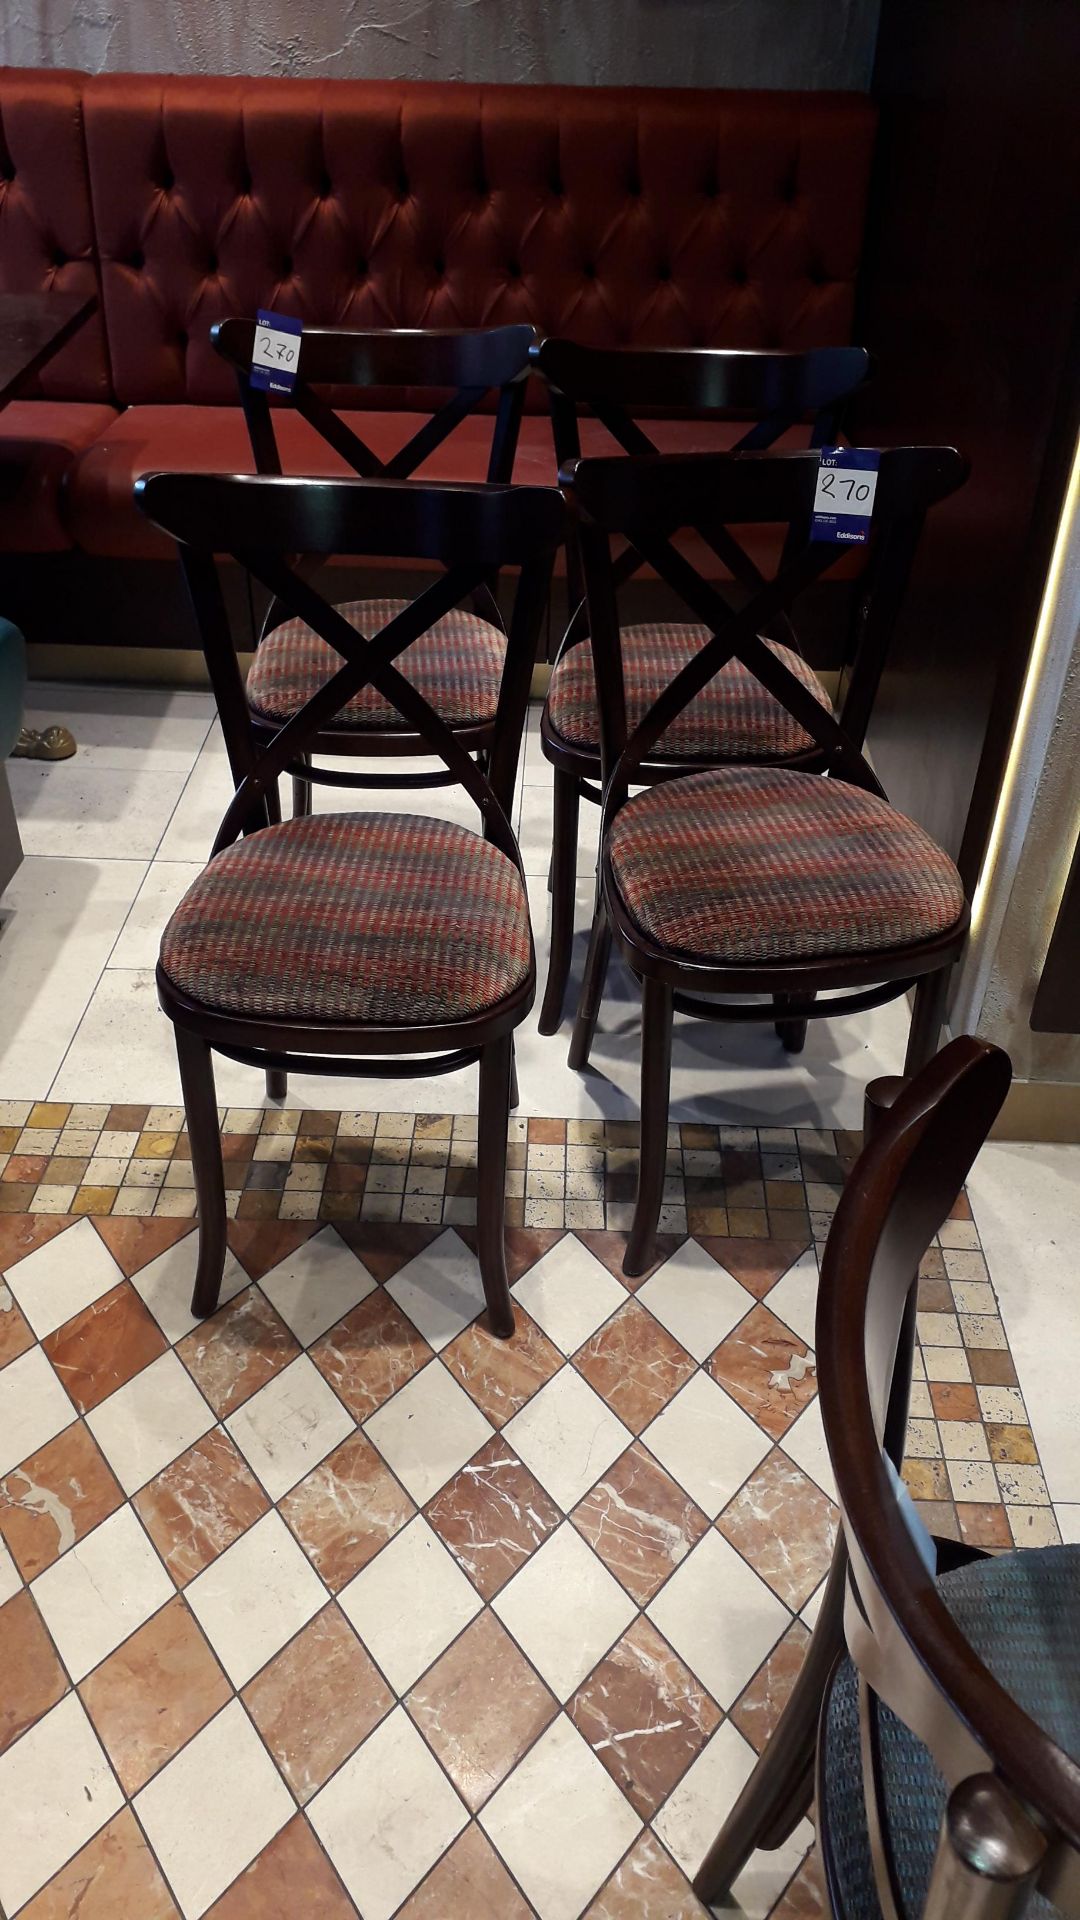 Set of 4 Wooden Chairs Upholstered Seats, Located at First Floor, The Bentall Centre, Wood Street, - Image 2 of 2